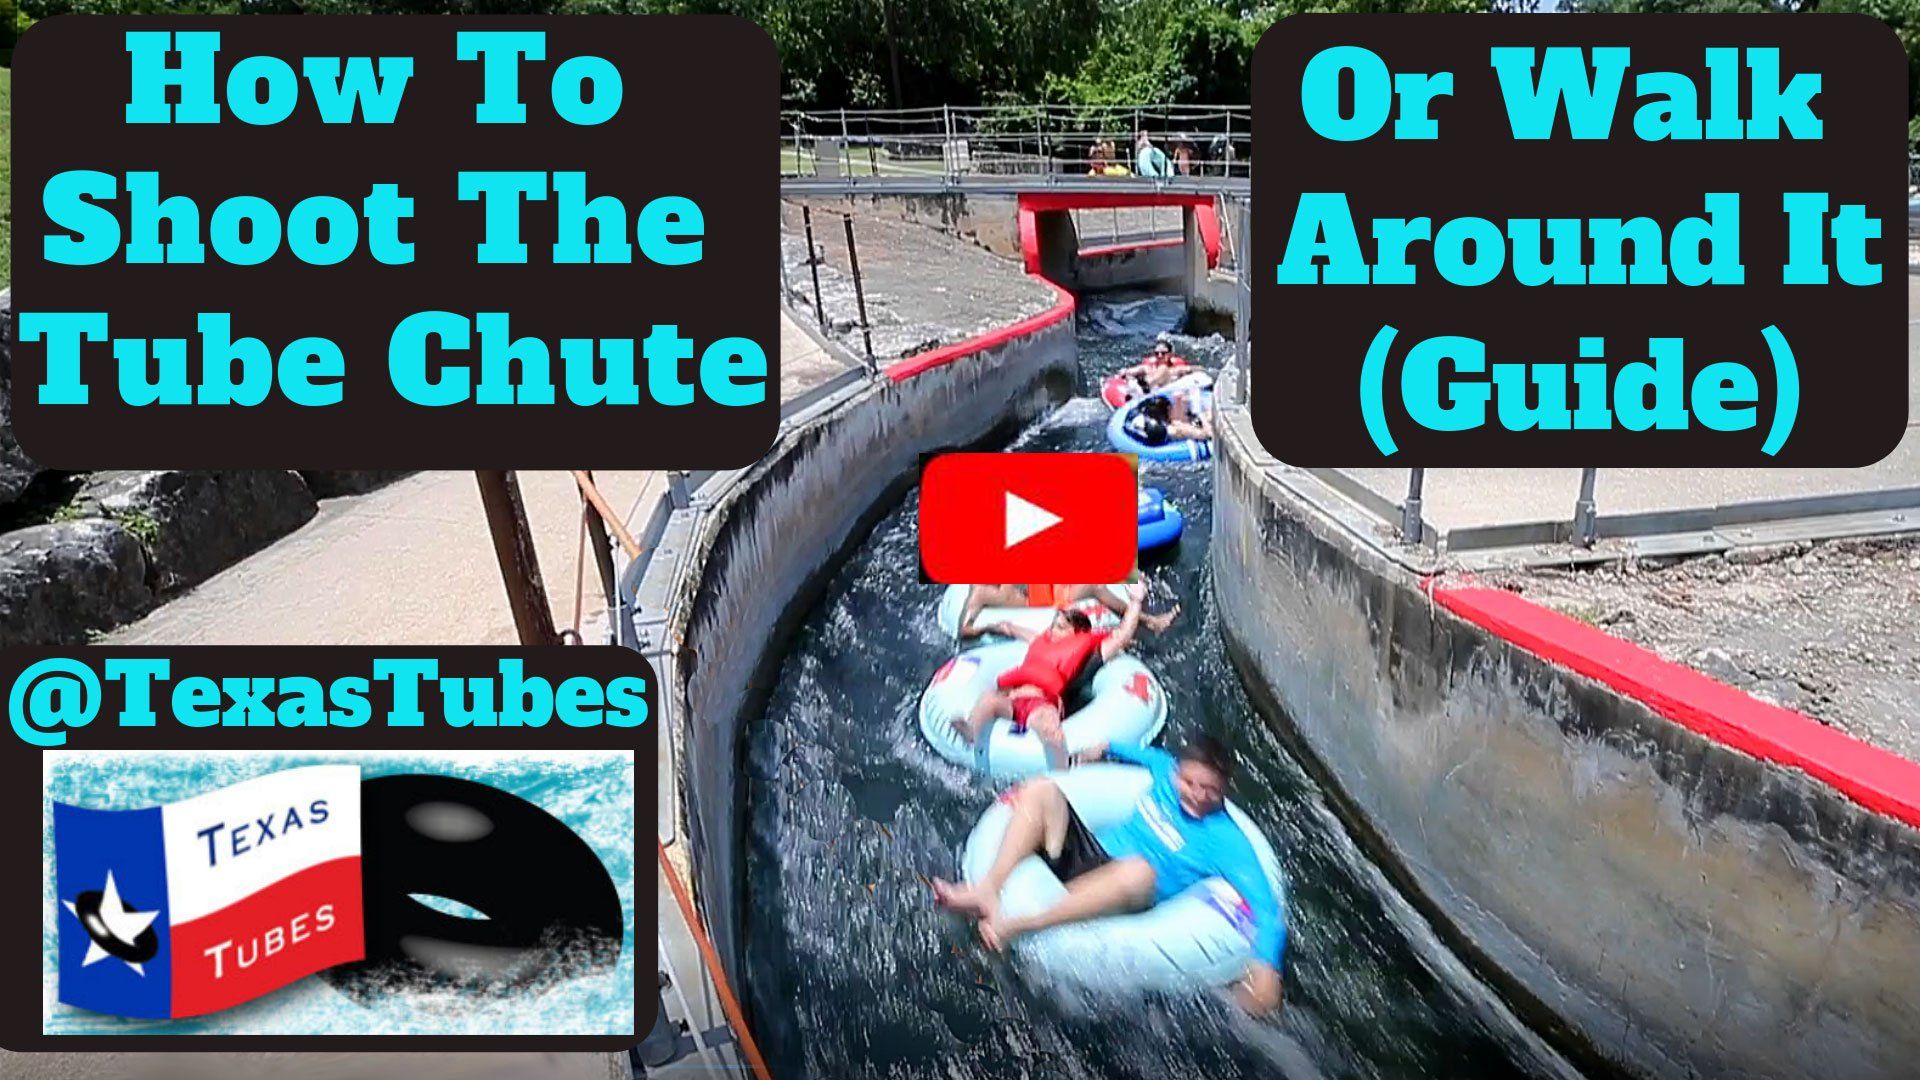 New Braunfels Tube Chute Video - How To Shoot The Tube Chute Or Walk Around It Guide on the Comal River at Texas Tubes